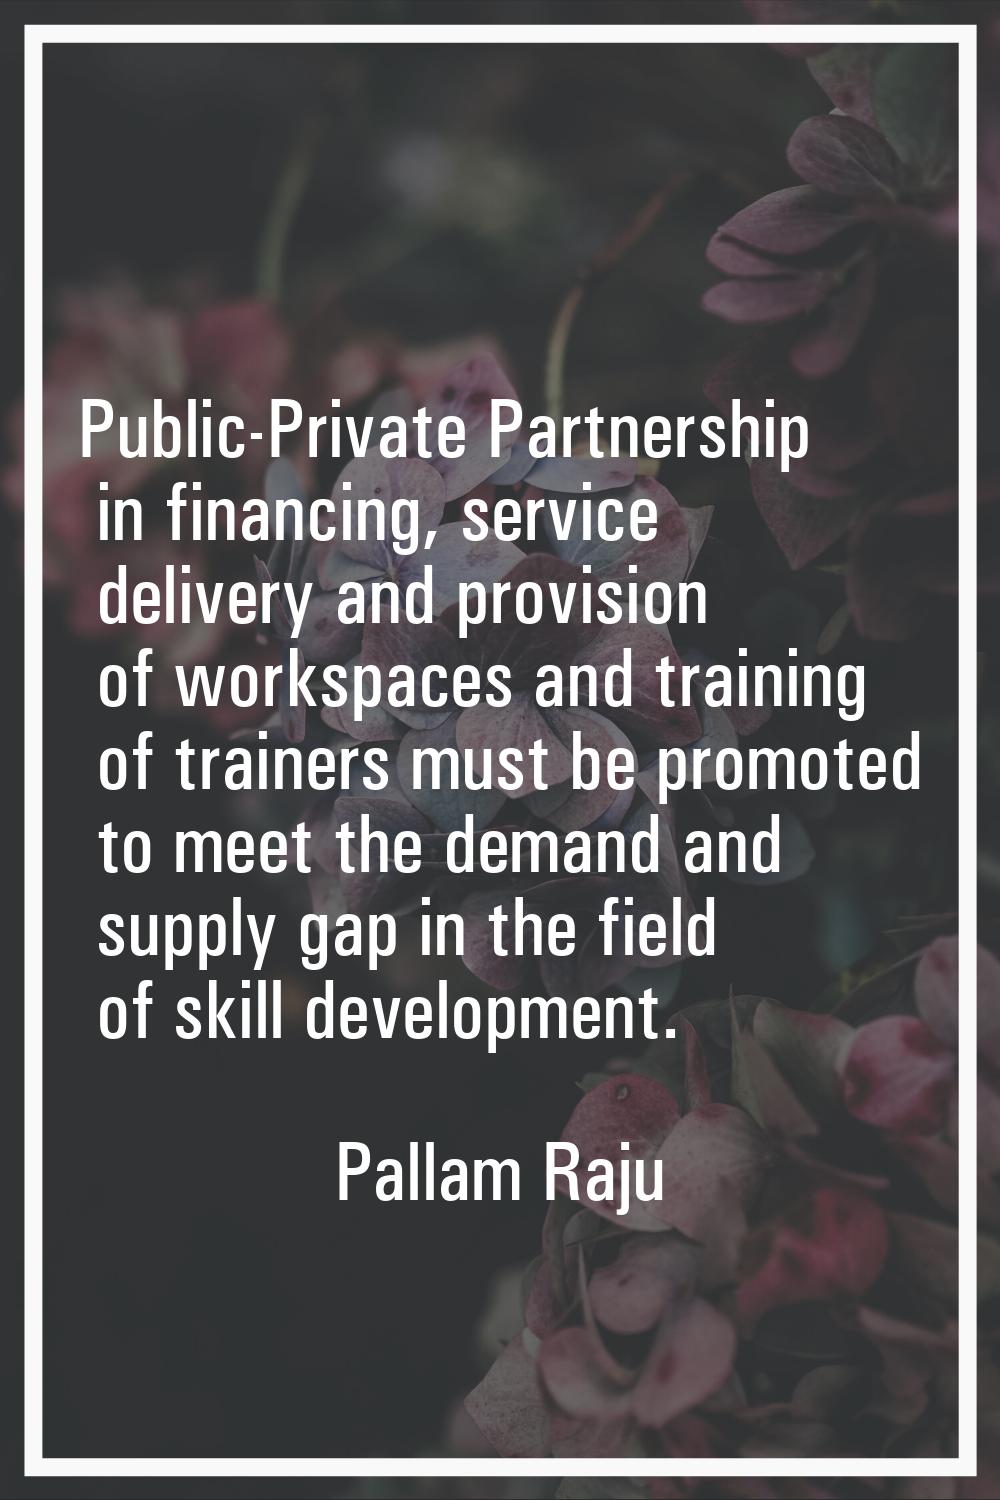 Public-Private Partnership in financing, service delivery and provision of workspaces and training 